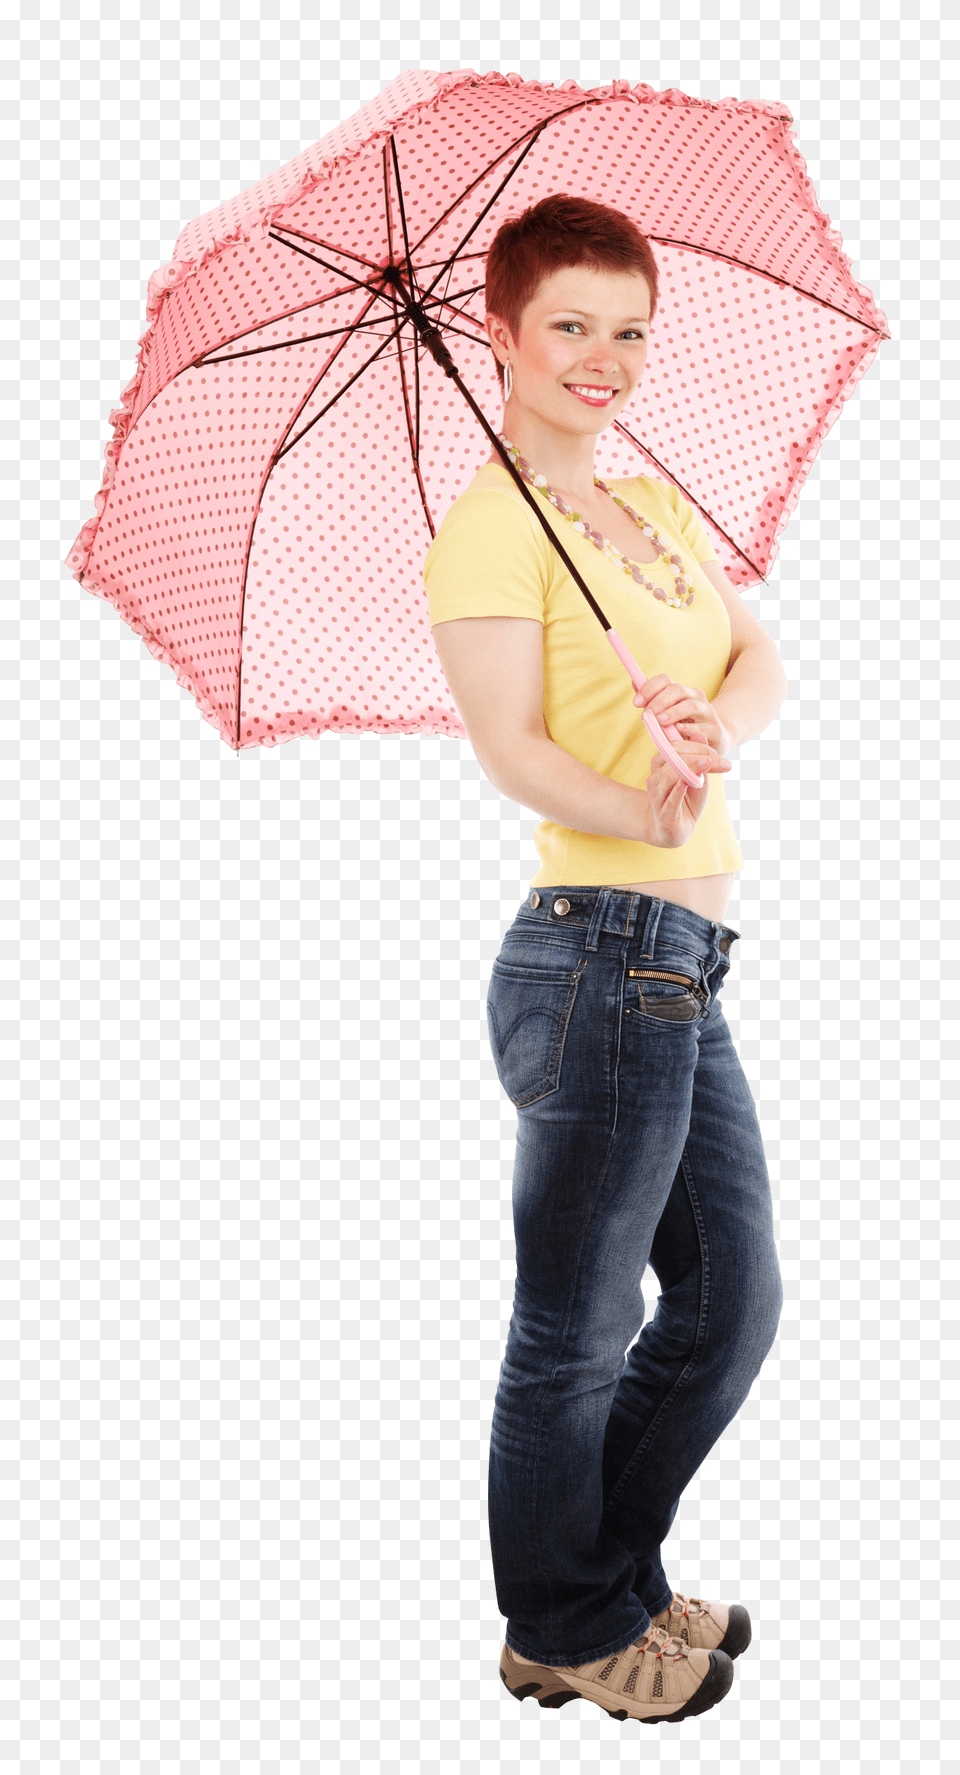 Pngpix Com Young Happy Woman Standing With Umbrella, Photography, Person, Pants, Jeans Png